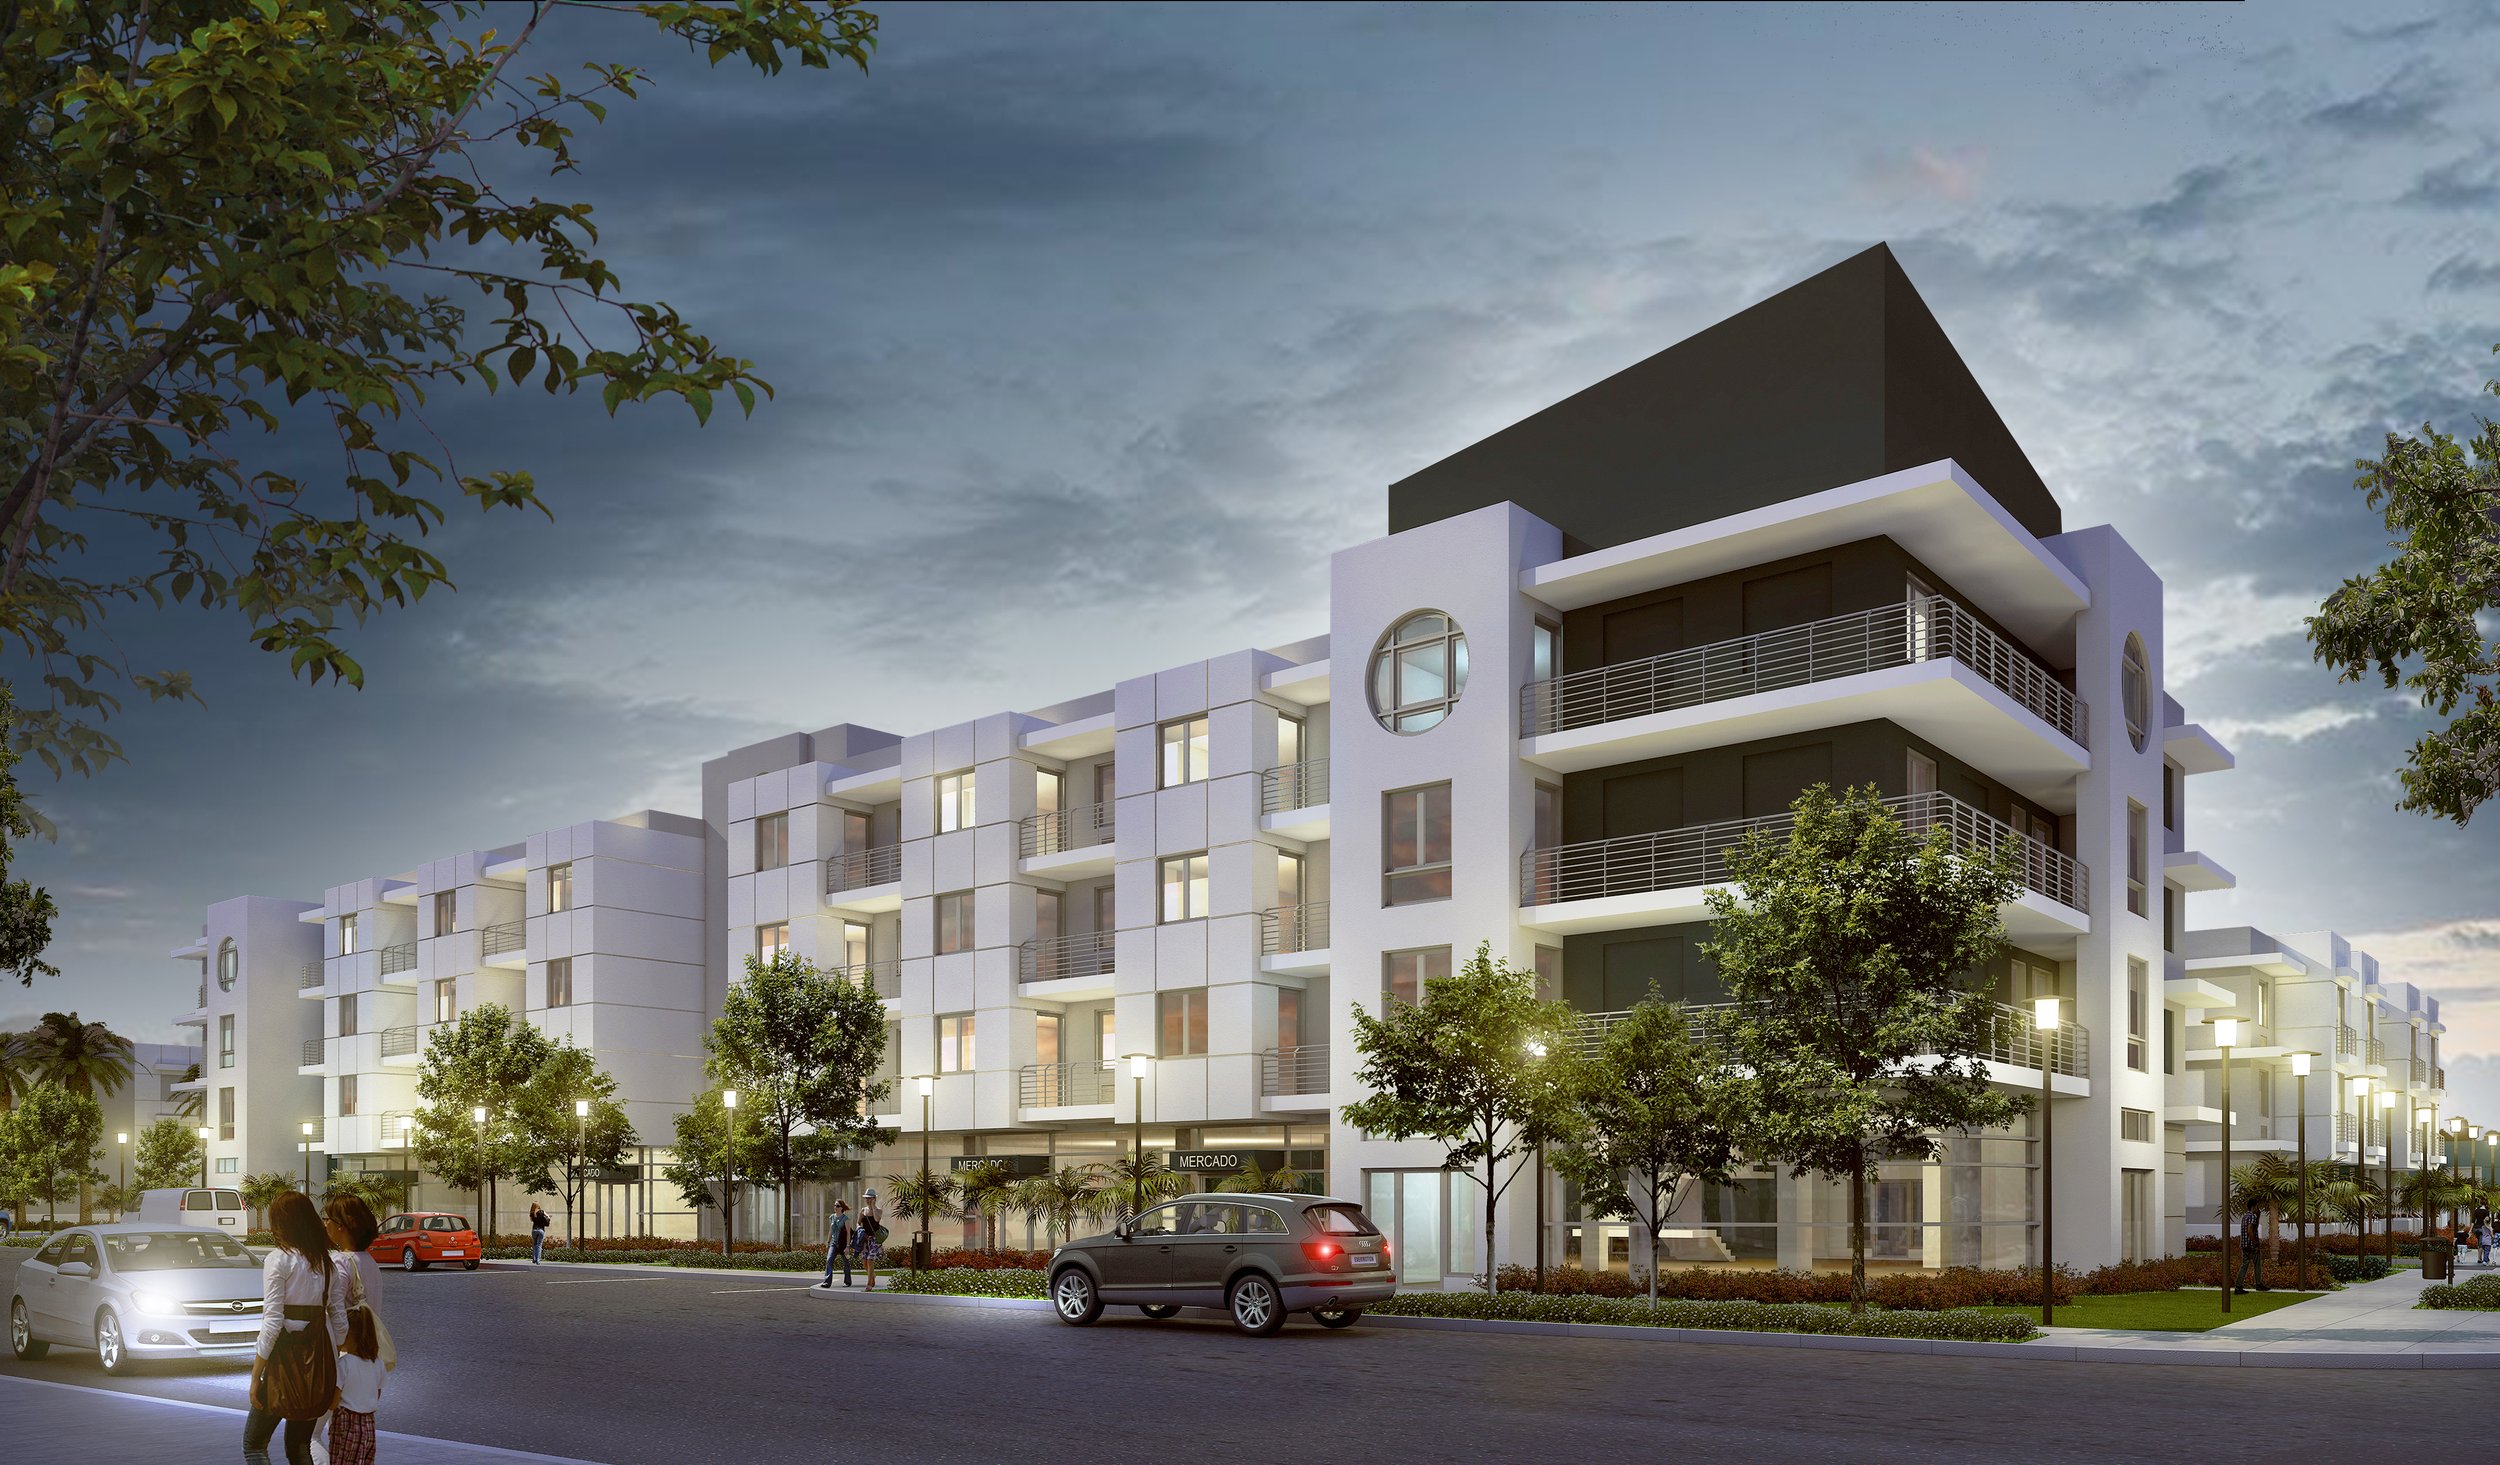  Concept render of Bayshore Villas affordable housing project. 